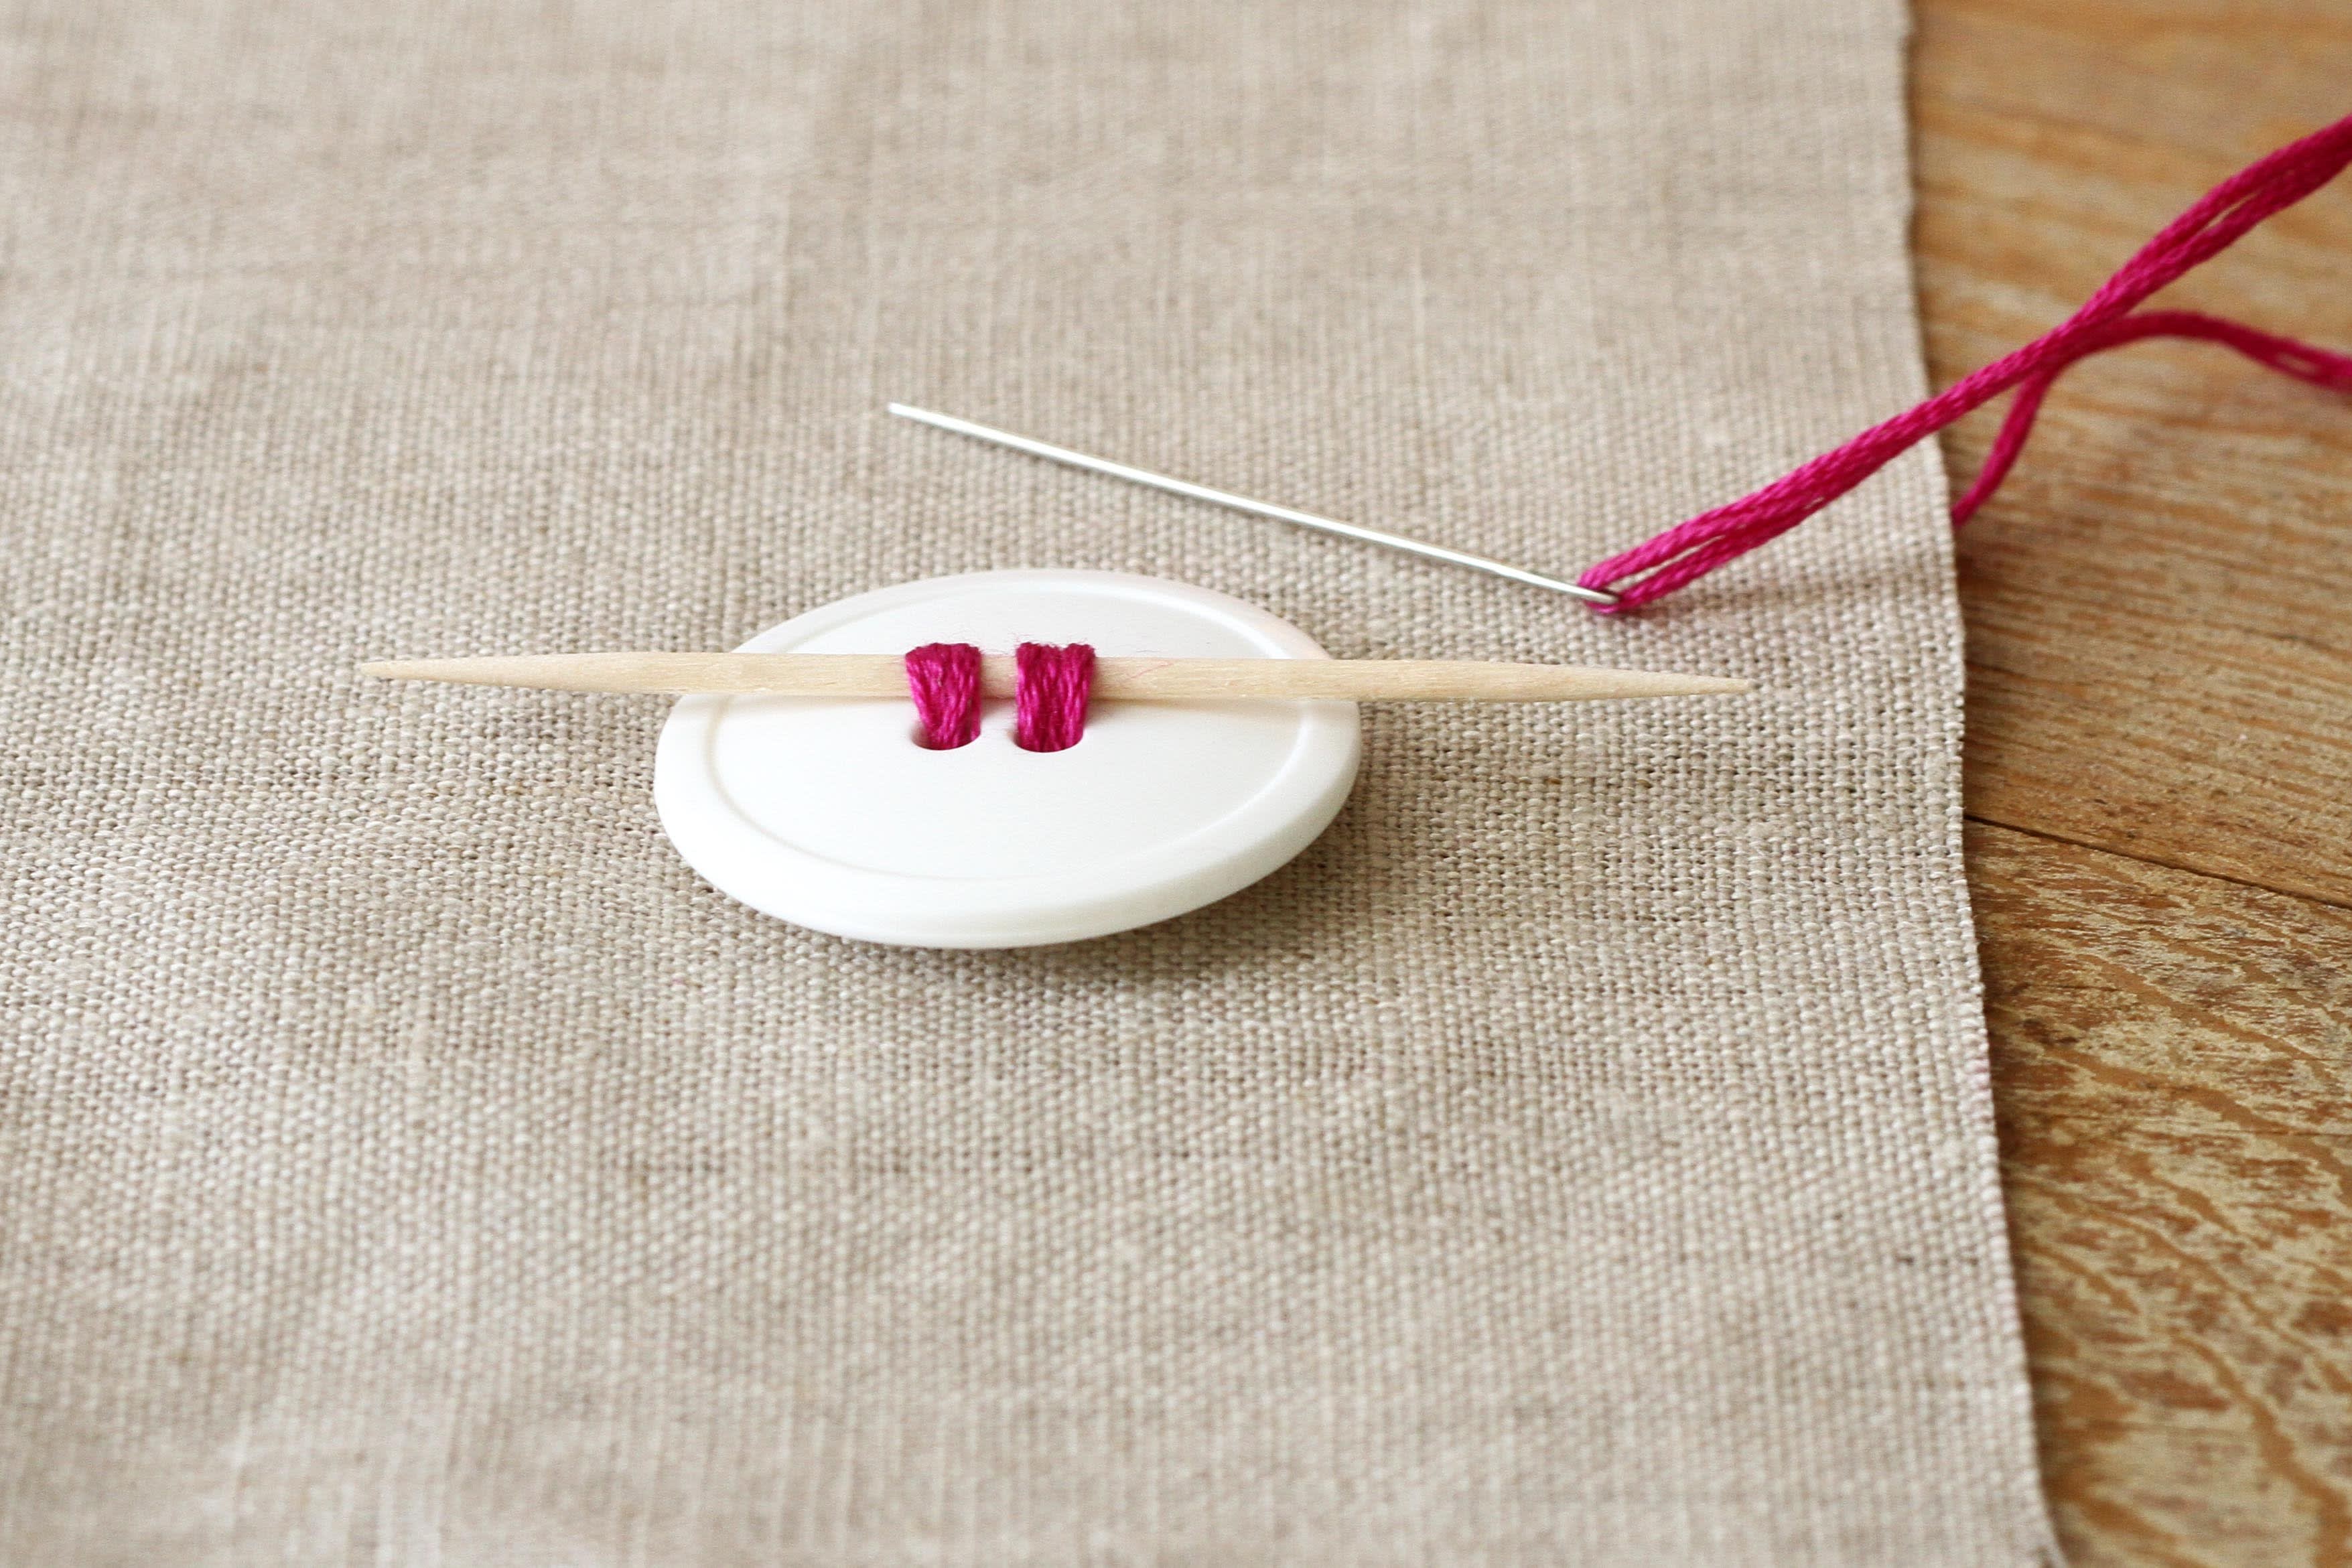 The Best Way To Sew a Button